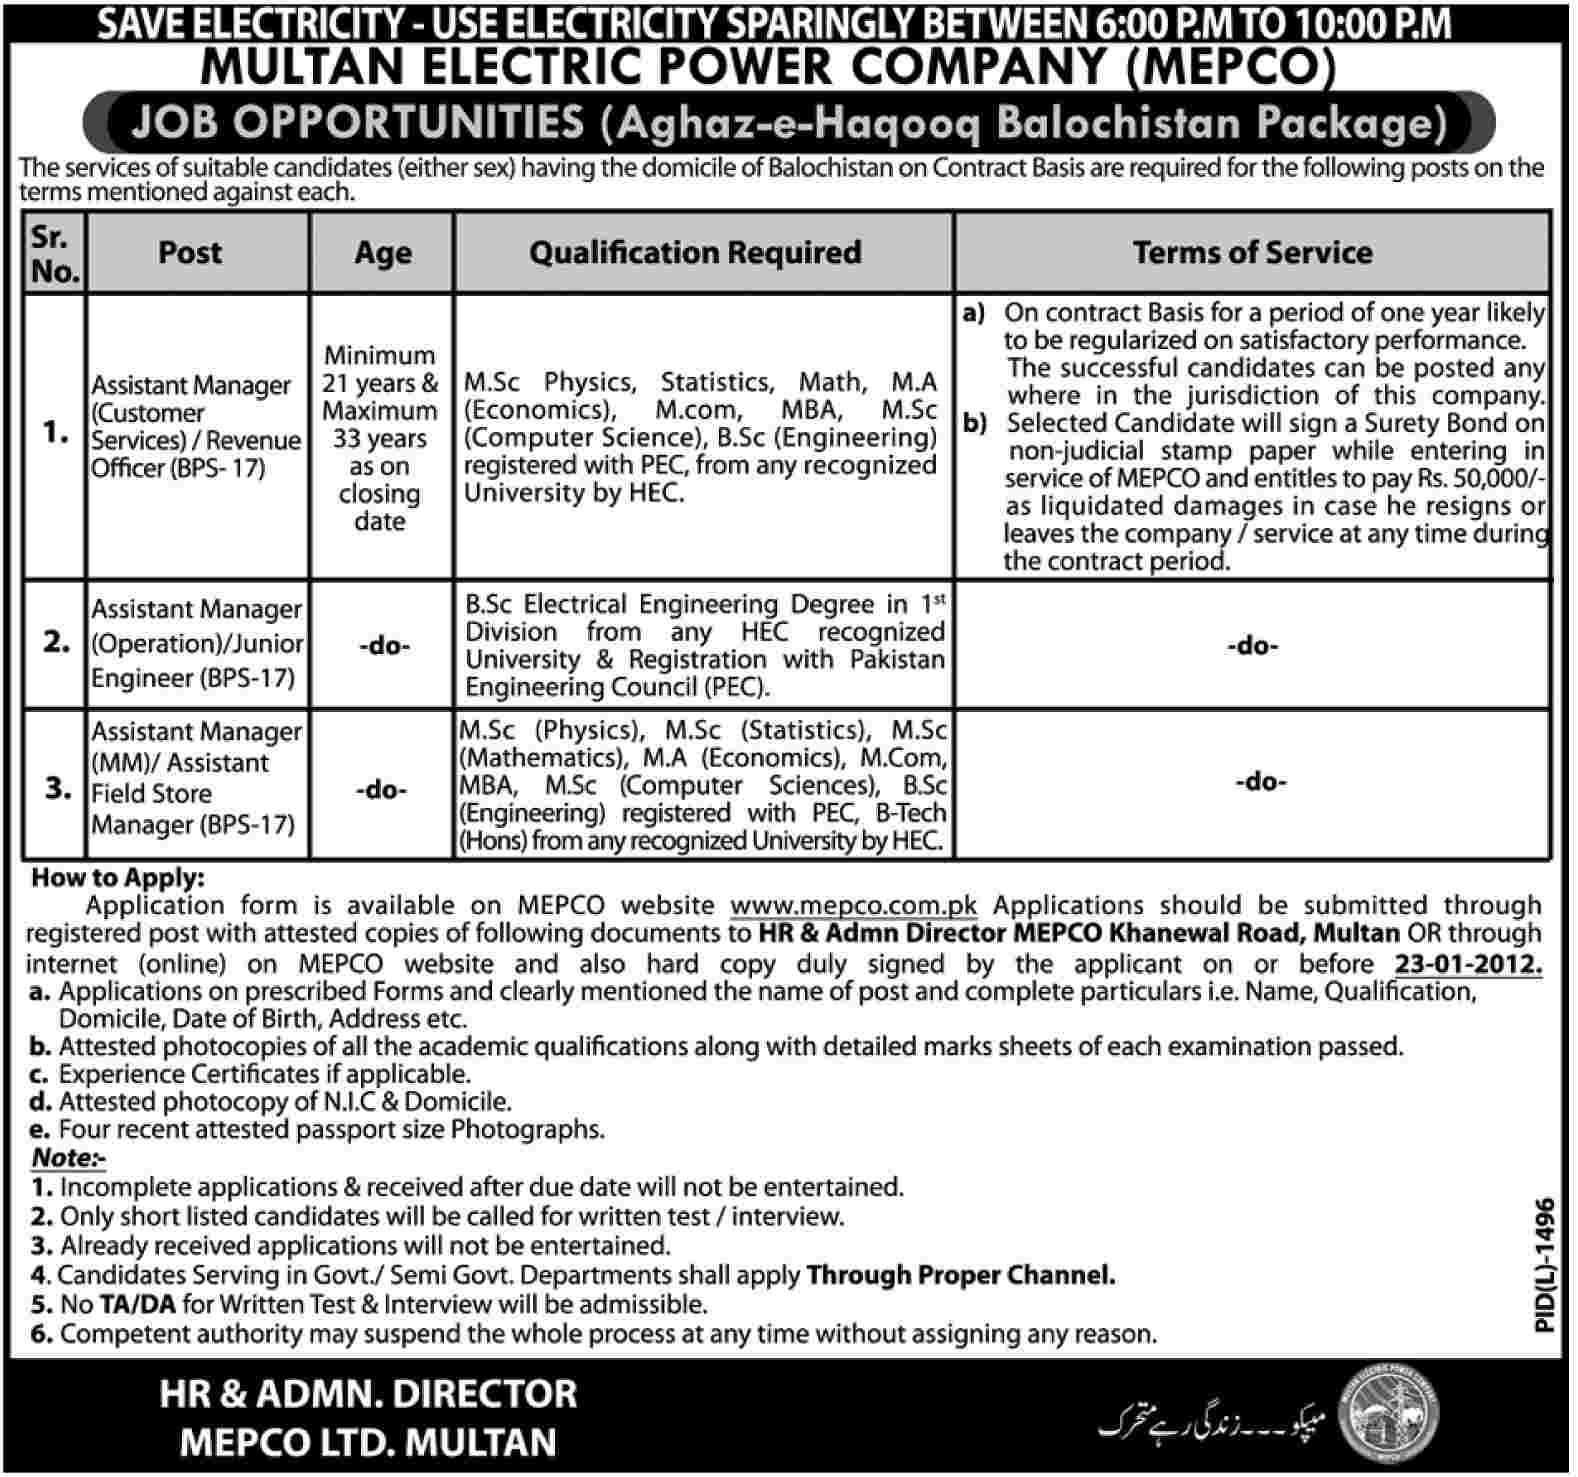 Multan Electric Power Company (MEPCO) Jobs Opportunities